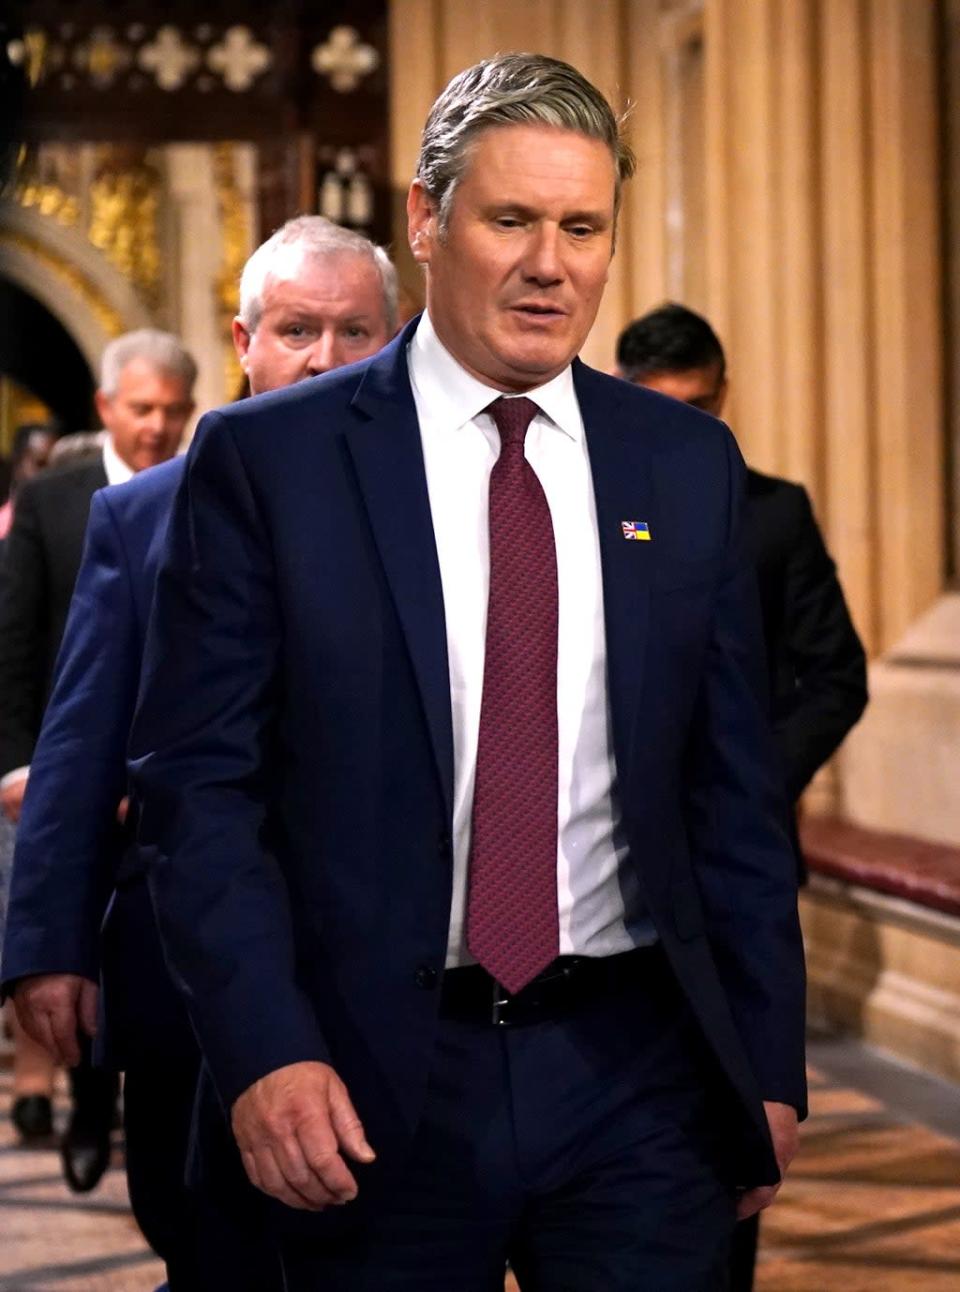 Sir Keir Starmer walks through the Central Lobby at the Palace of Westminster during the State Opening of Parliament in the House of Lords (Yui Mok/PA) (PA Wire)